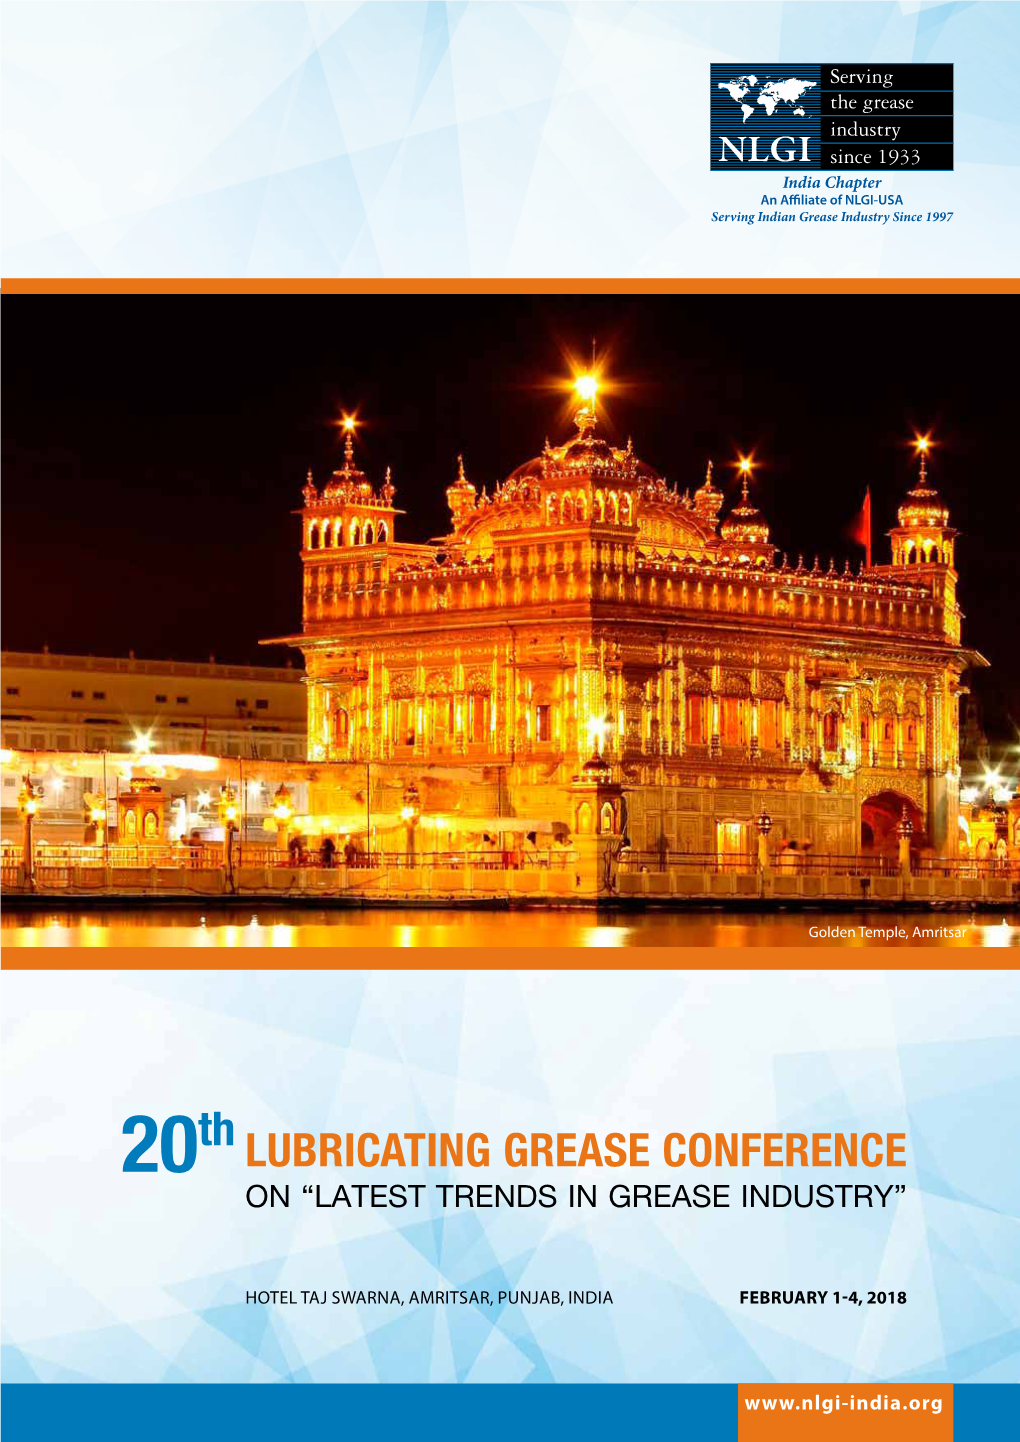 Lubricating Grease Conference on “LATEST TRENDS in GREASE INDUSTRY”